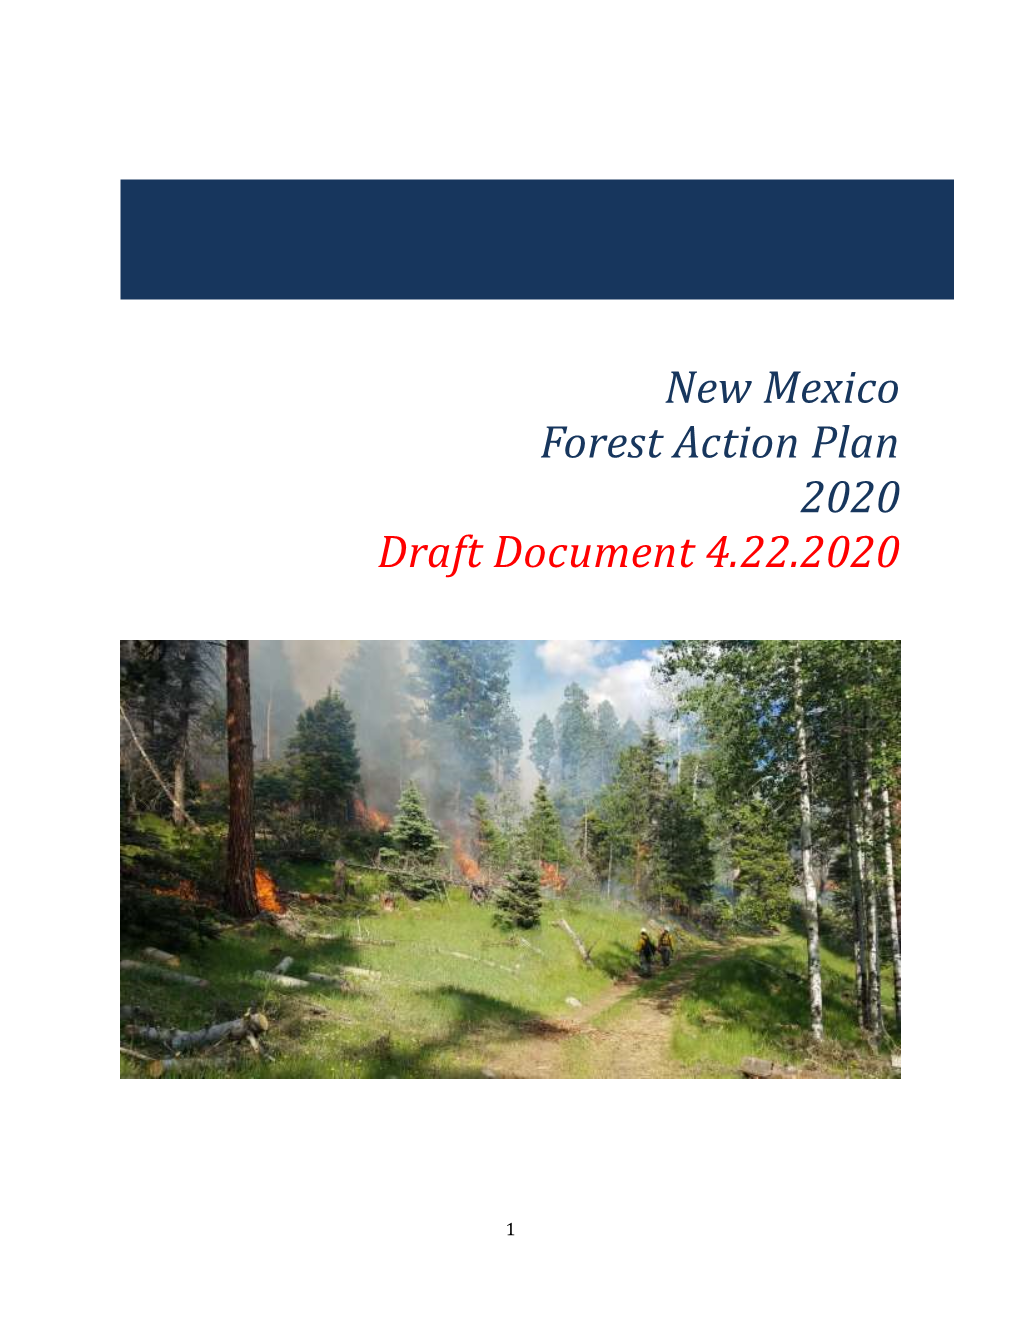 New Mexico Forest Action Plan 2020 Draft Document 4.22.2020